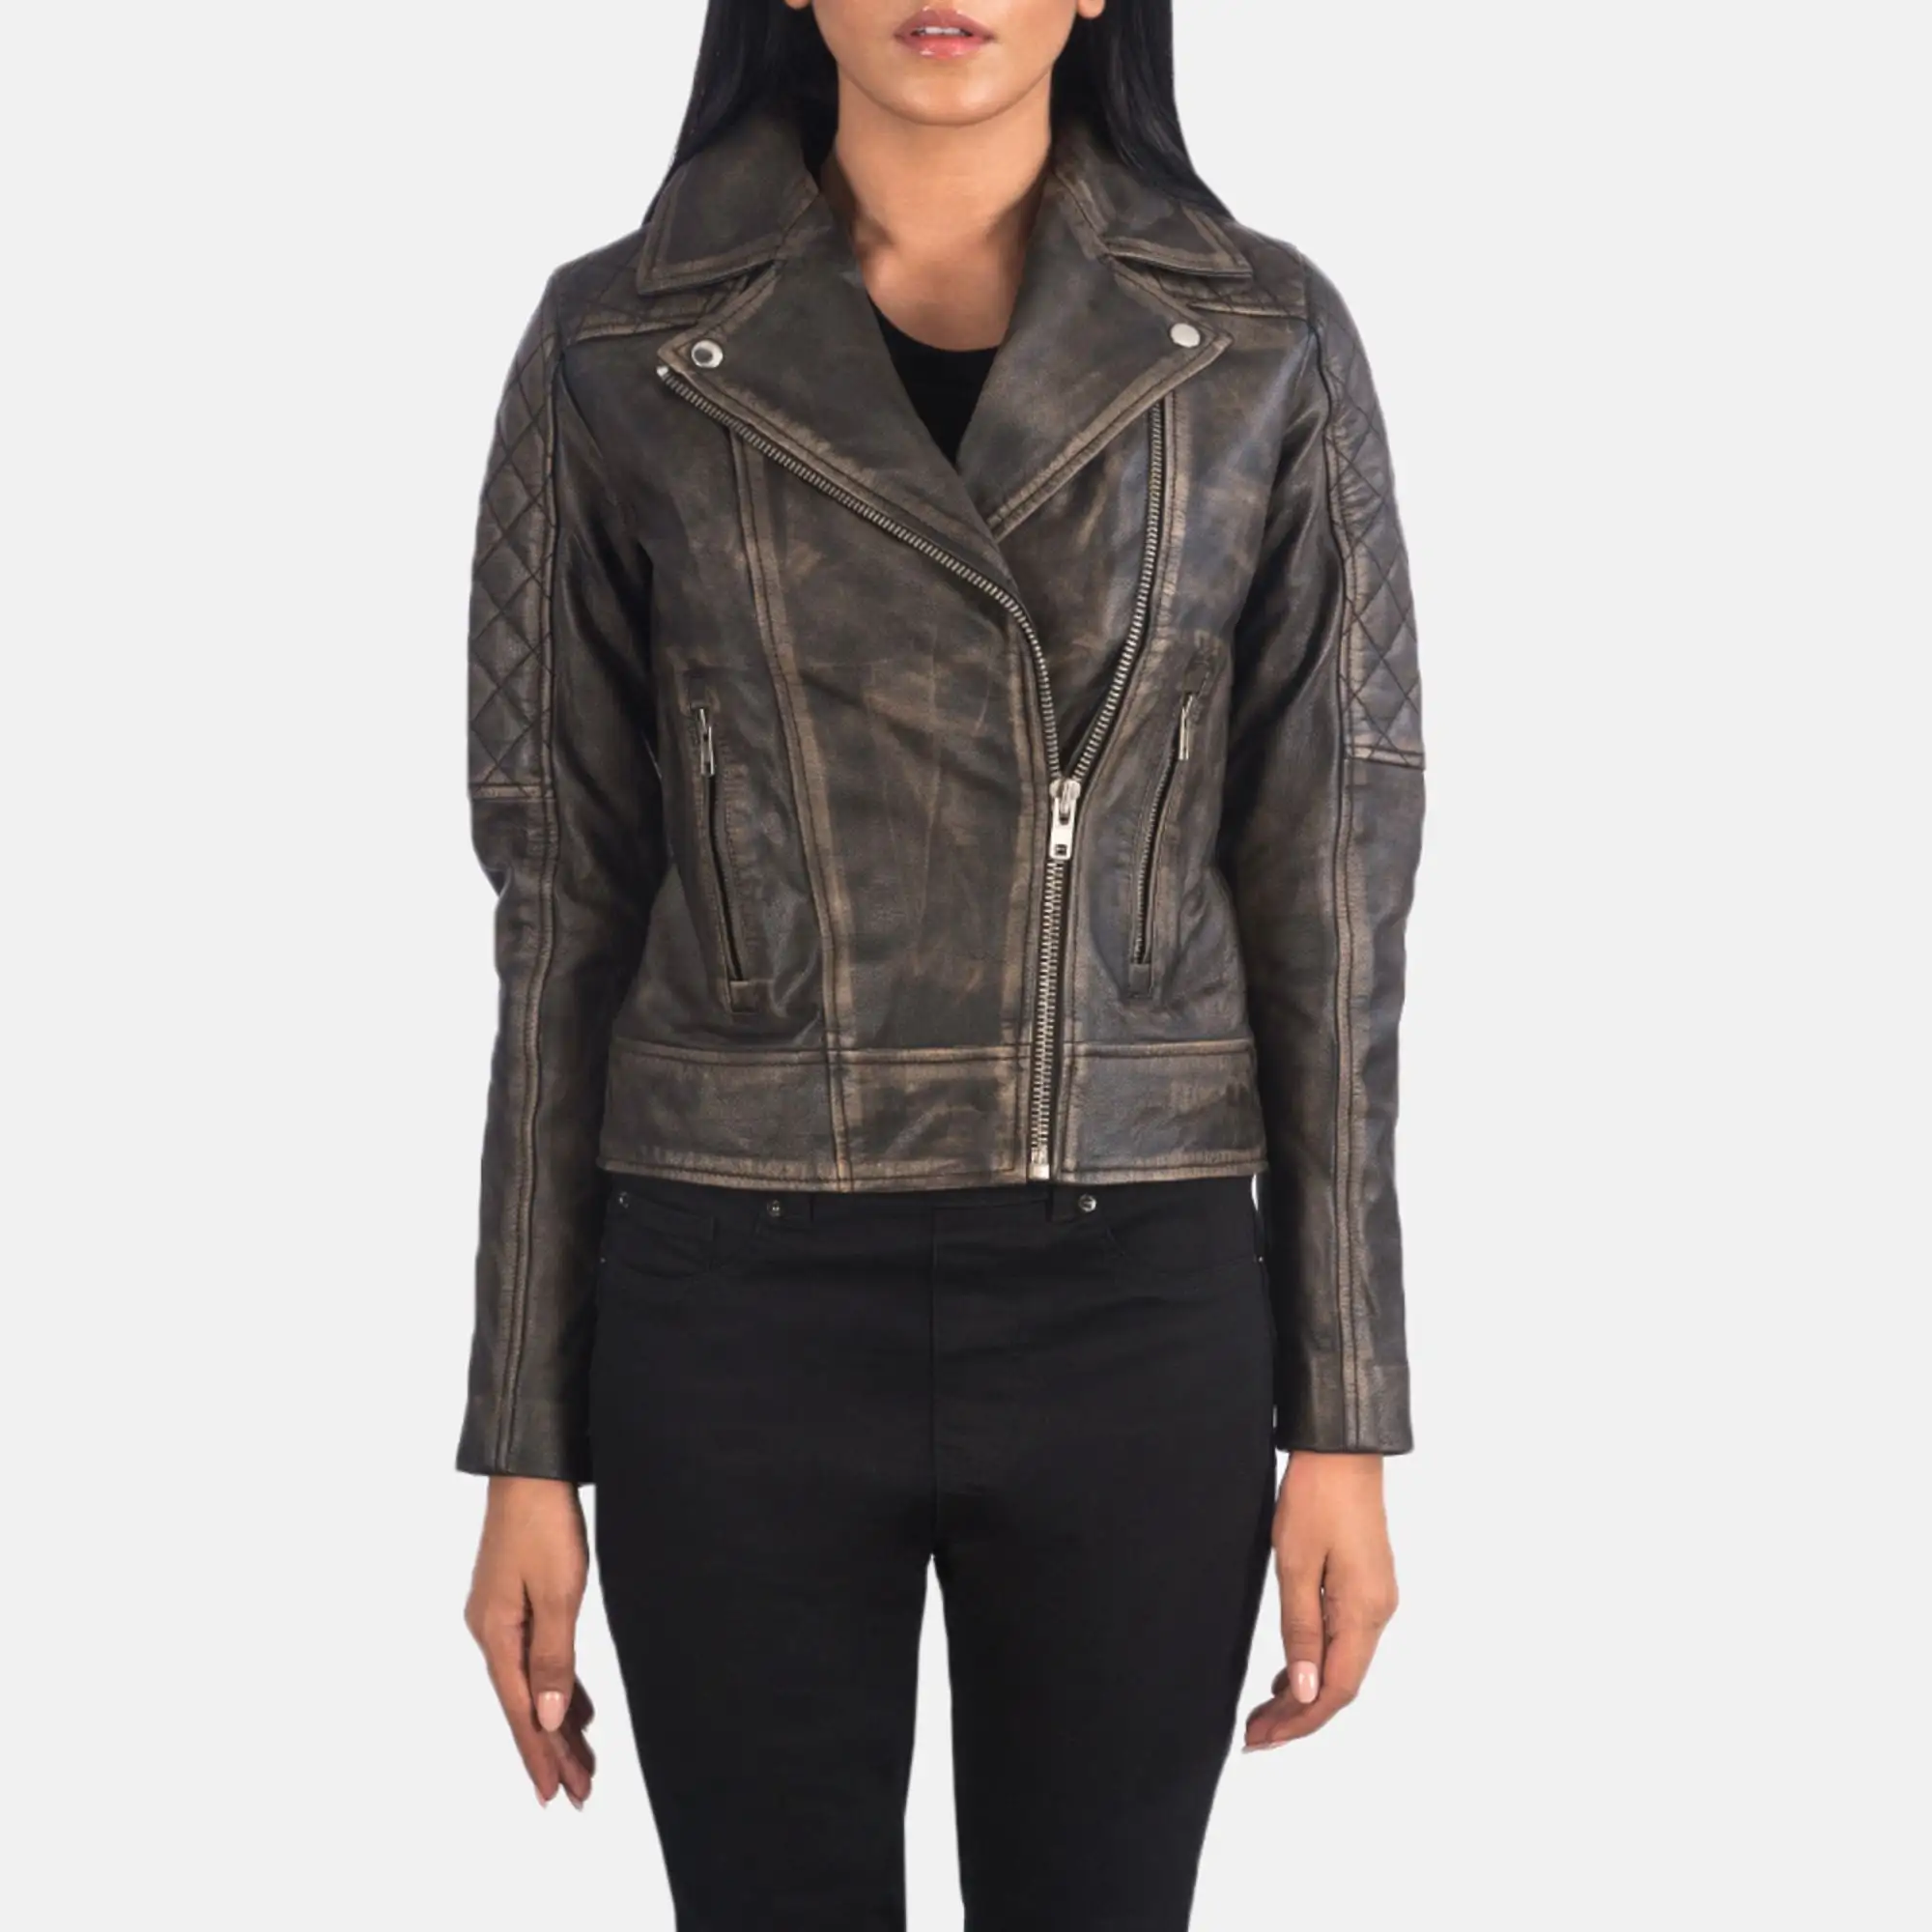 Real Leather Sheepskin Aniline Zipper Cityscape Black Women Biker Jacket with Quilted Viscose Lining and Inside Outside Pockets